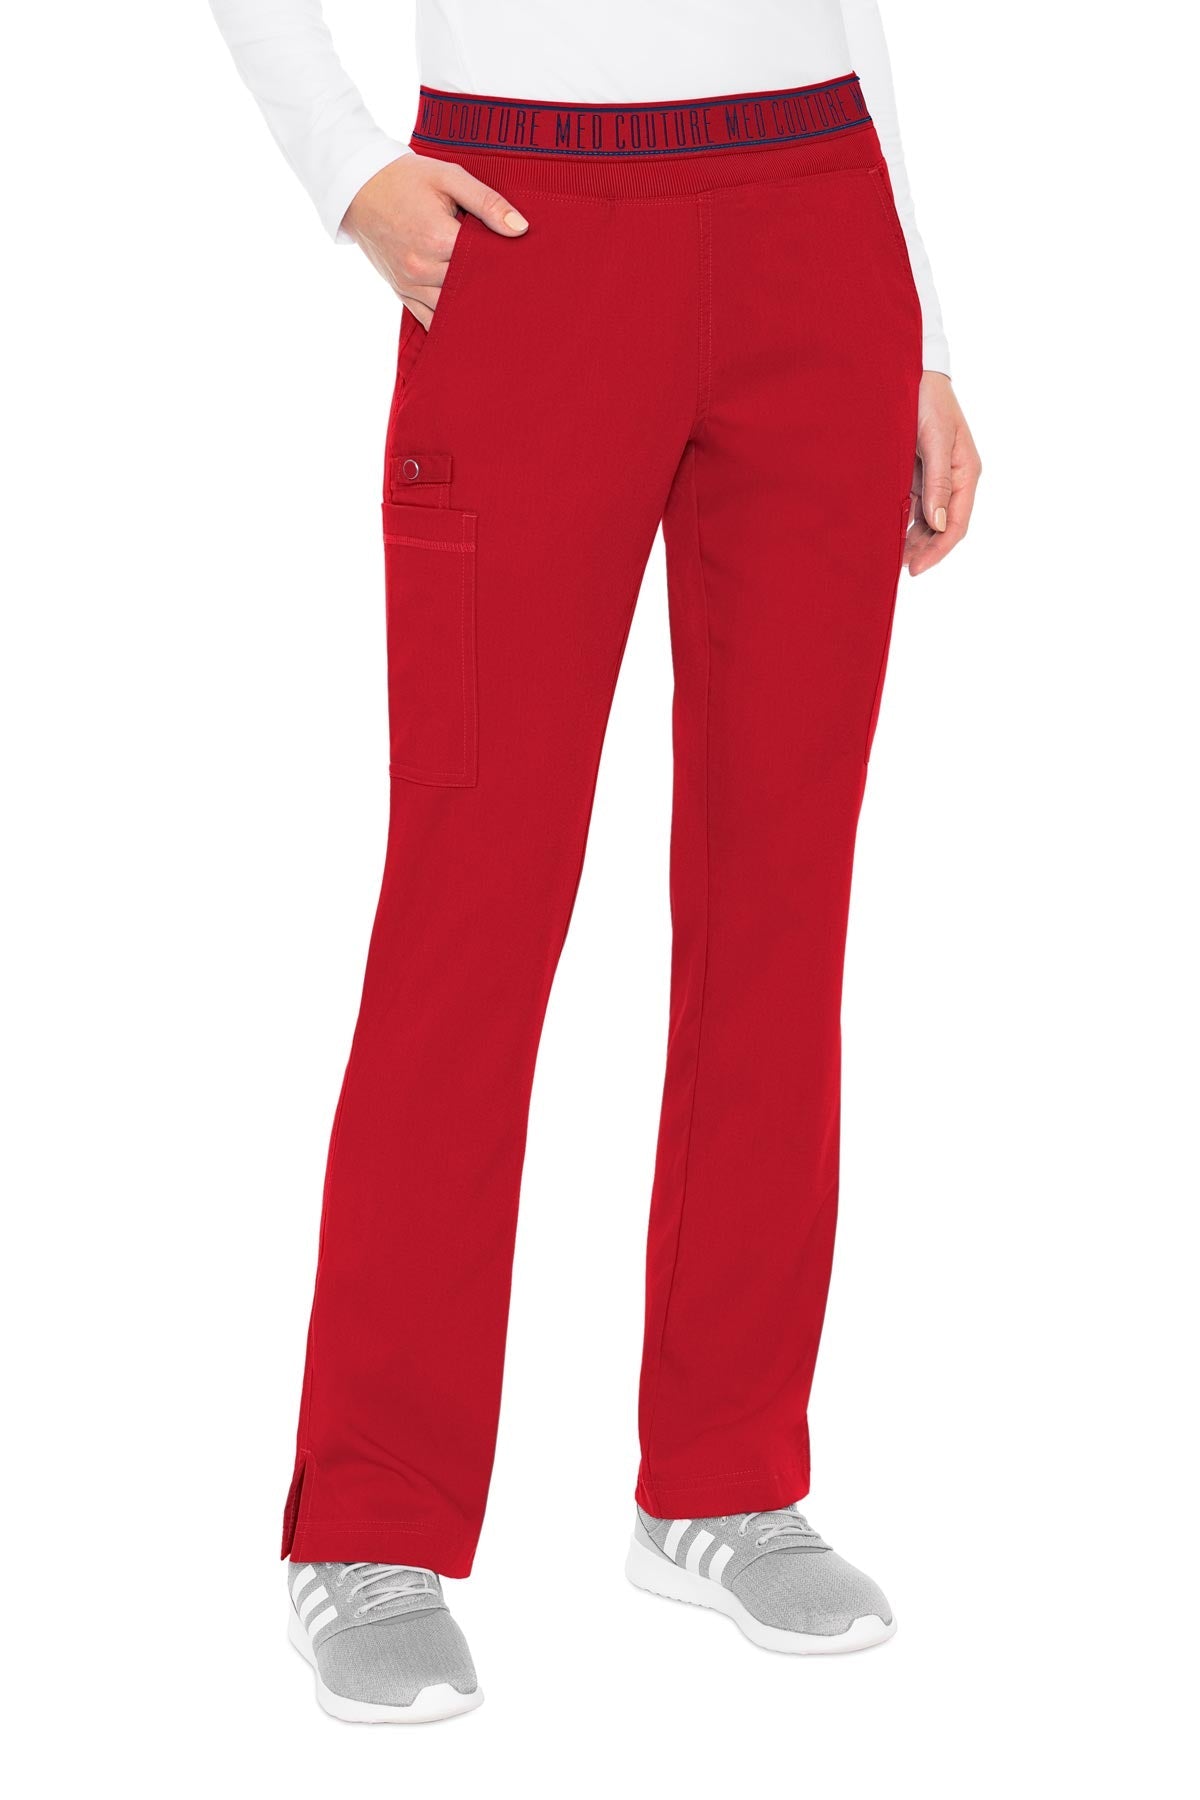 Med Couture Red PANT